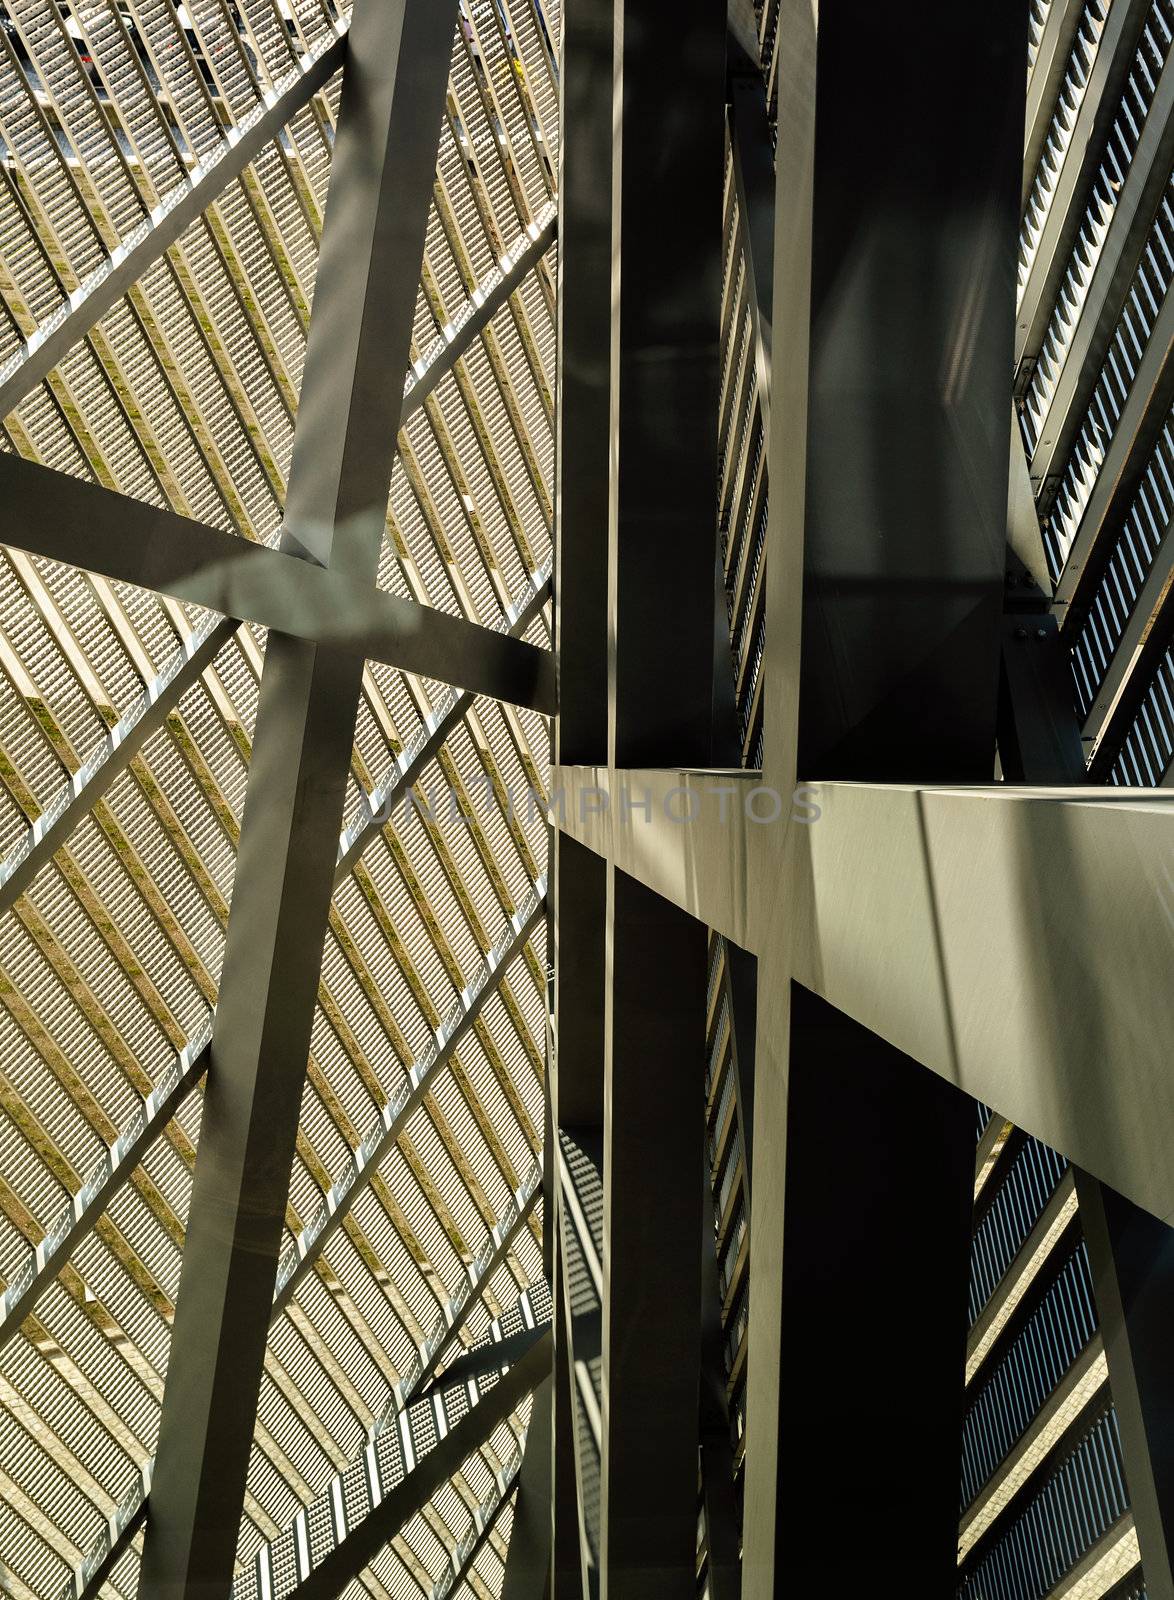 Detail of the Libeskind's Wedge from inside.